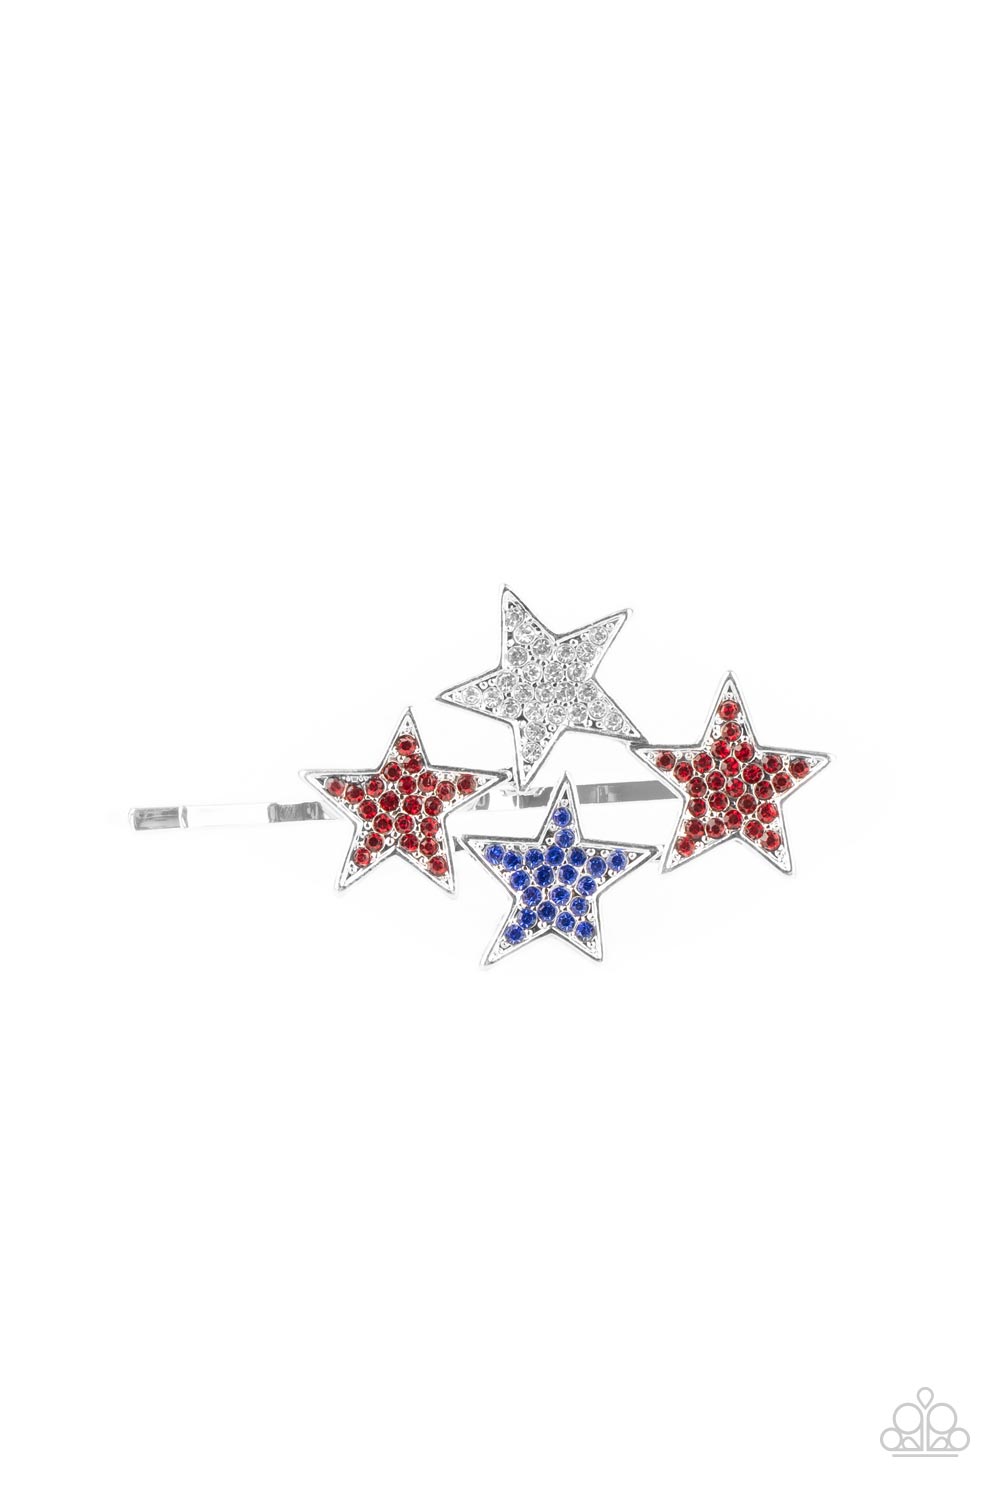 &lt;P&gt;Dotted in red, white, and blue rhinestones, an explosion of stars adorns the front of a silver bobby pin for a stellar patriotic shimmer. &lt;/P&gt;

&lt;P&gt;&lt;I&gt;Sold as one individual decorative bobby pin. &lt;/I&gt;&lt;/P&gt;


&lt;img src=\&quot;https://d9b54x484lq62.cloudfront.net/paparazzi/shopping/images/517_tag150x115_1.png\&quot; alt=\&quot;New Kit\&quot; align=\&quot;middle\&quot; height=\&quot;50\&quot; width=\&quot;50\&quot;/&gt;